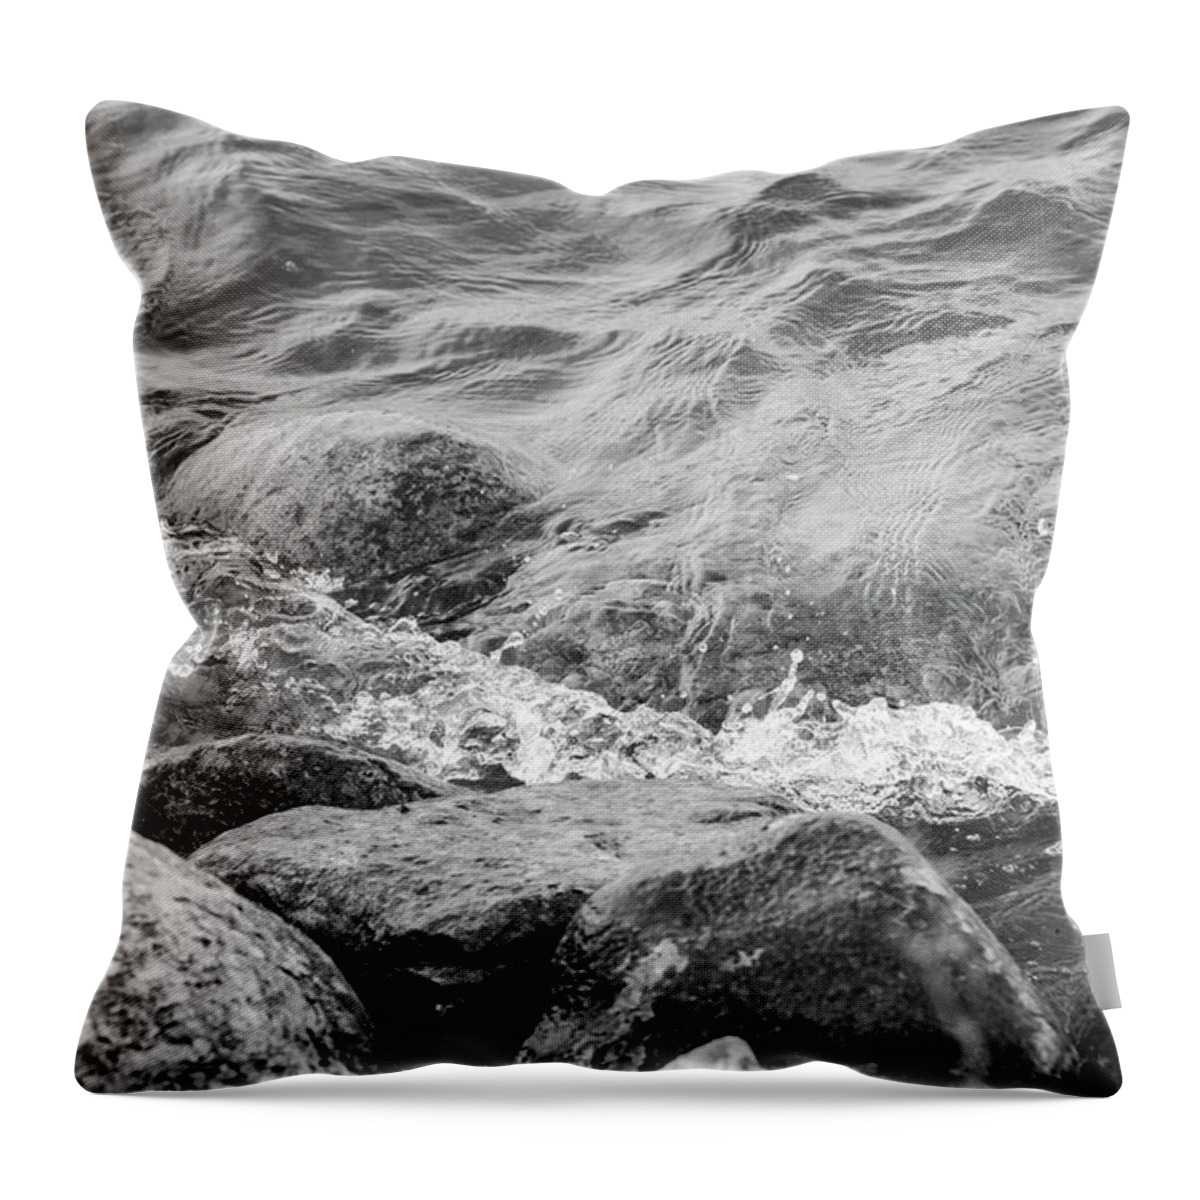 Rio Grande Throw Pillow featuring the photograph Rocky Tide by SR Green